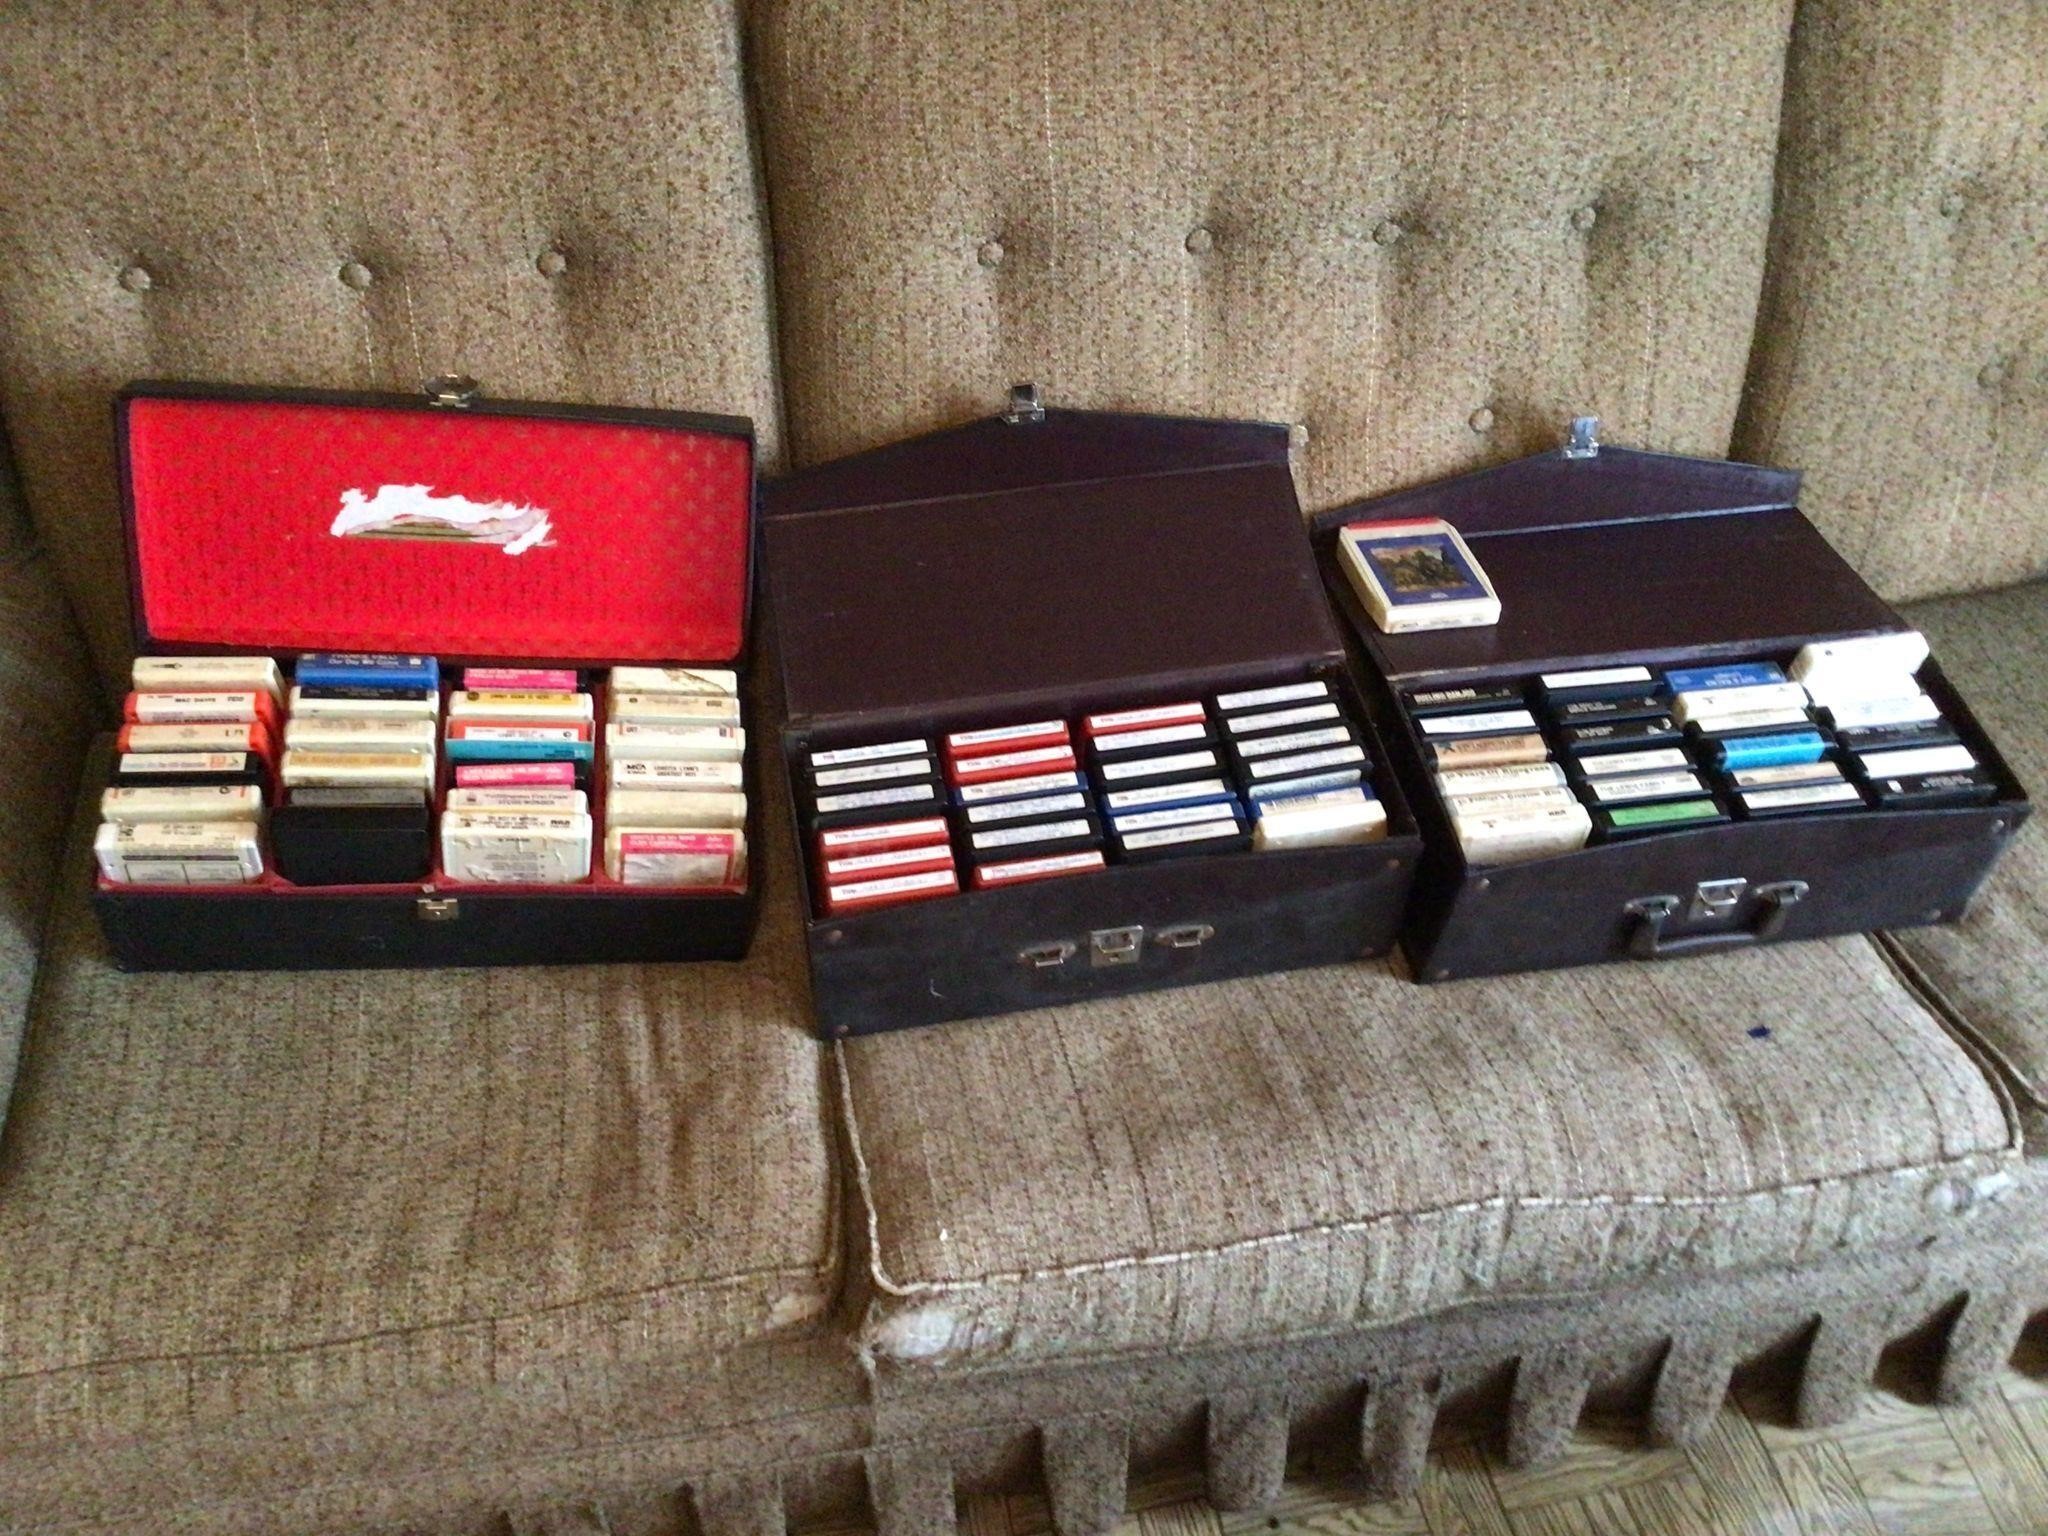 8 TRACK TAPES = 3 CASES